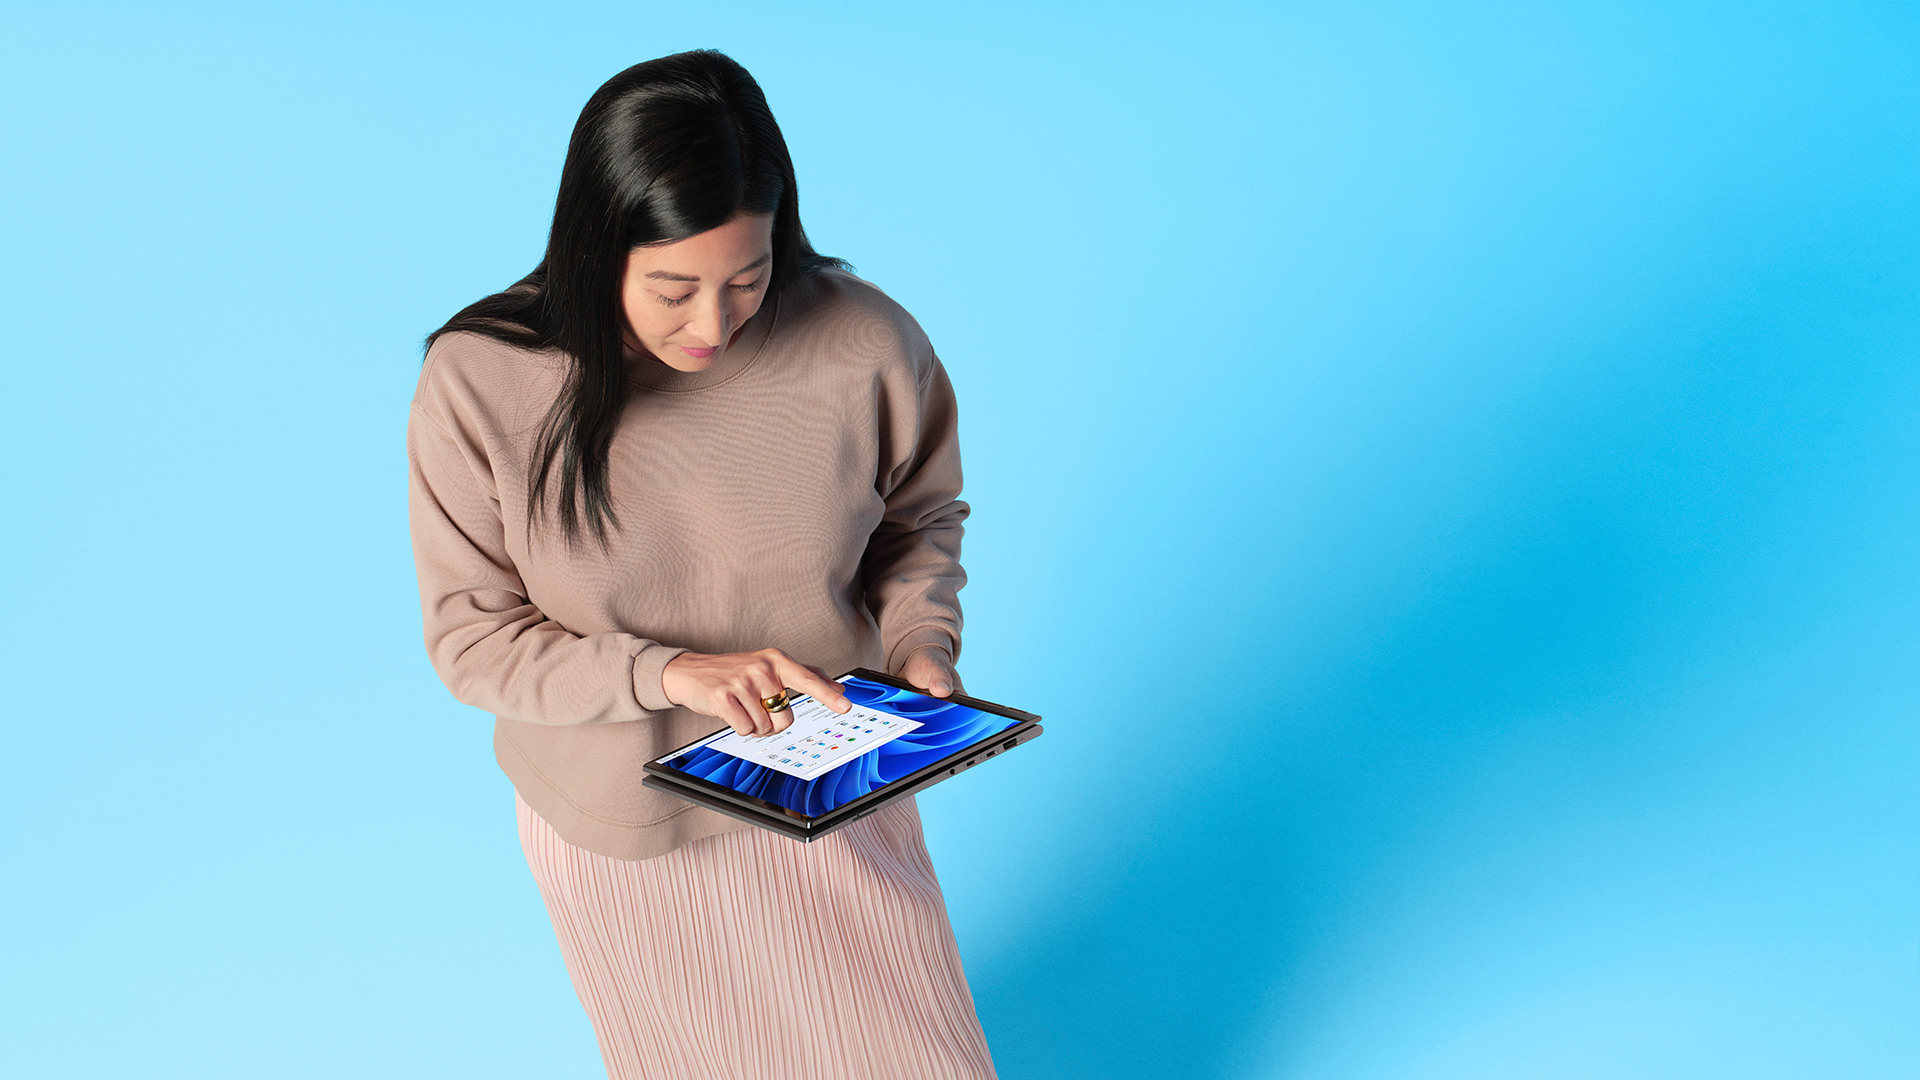 A woman using a touchscreen device that has Windows 11 installed